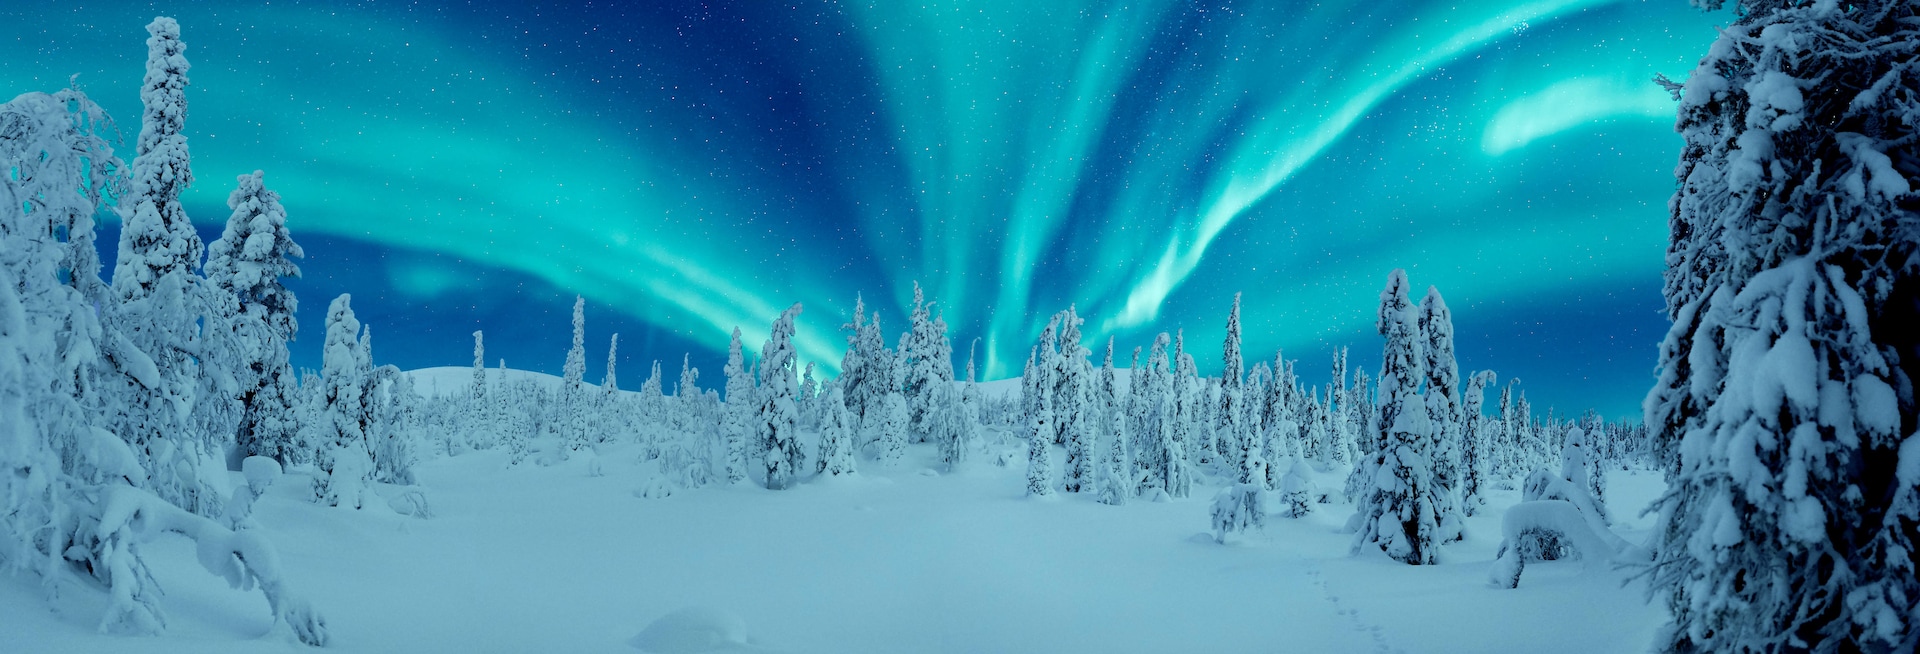 amplitude synet Kan ignoreres Plan your trip to see the Northern Lights at their isolated best | Finnair  United States